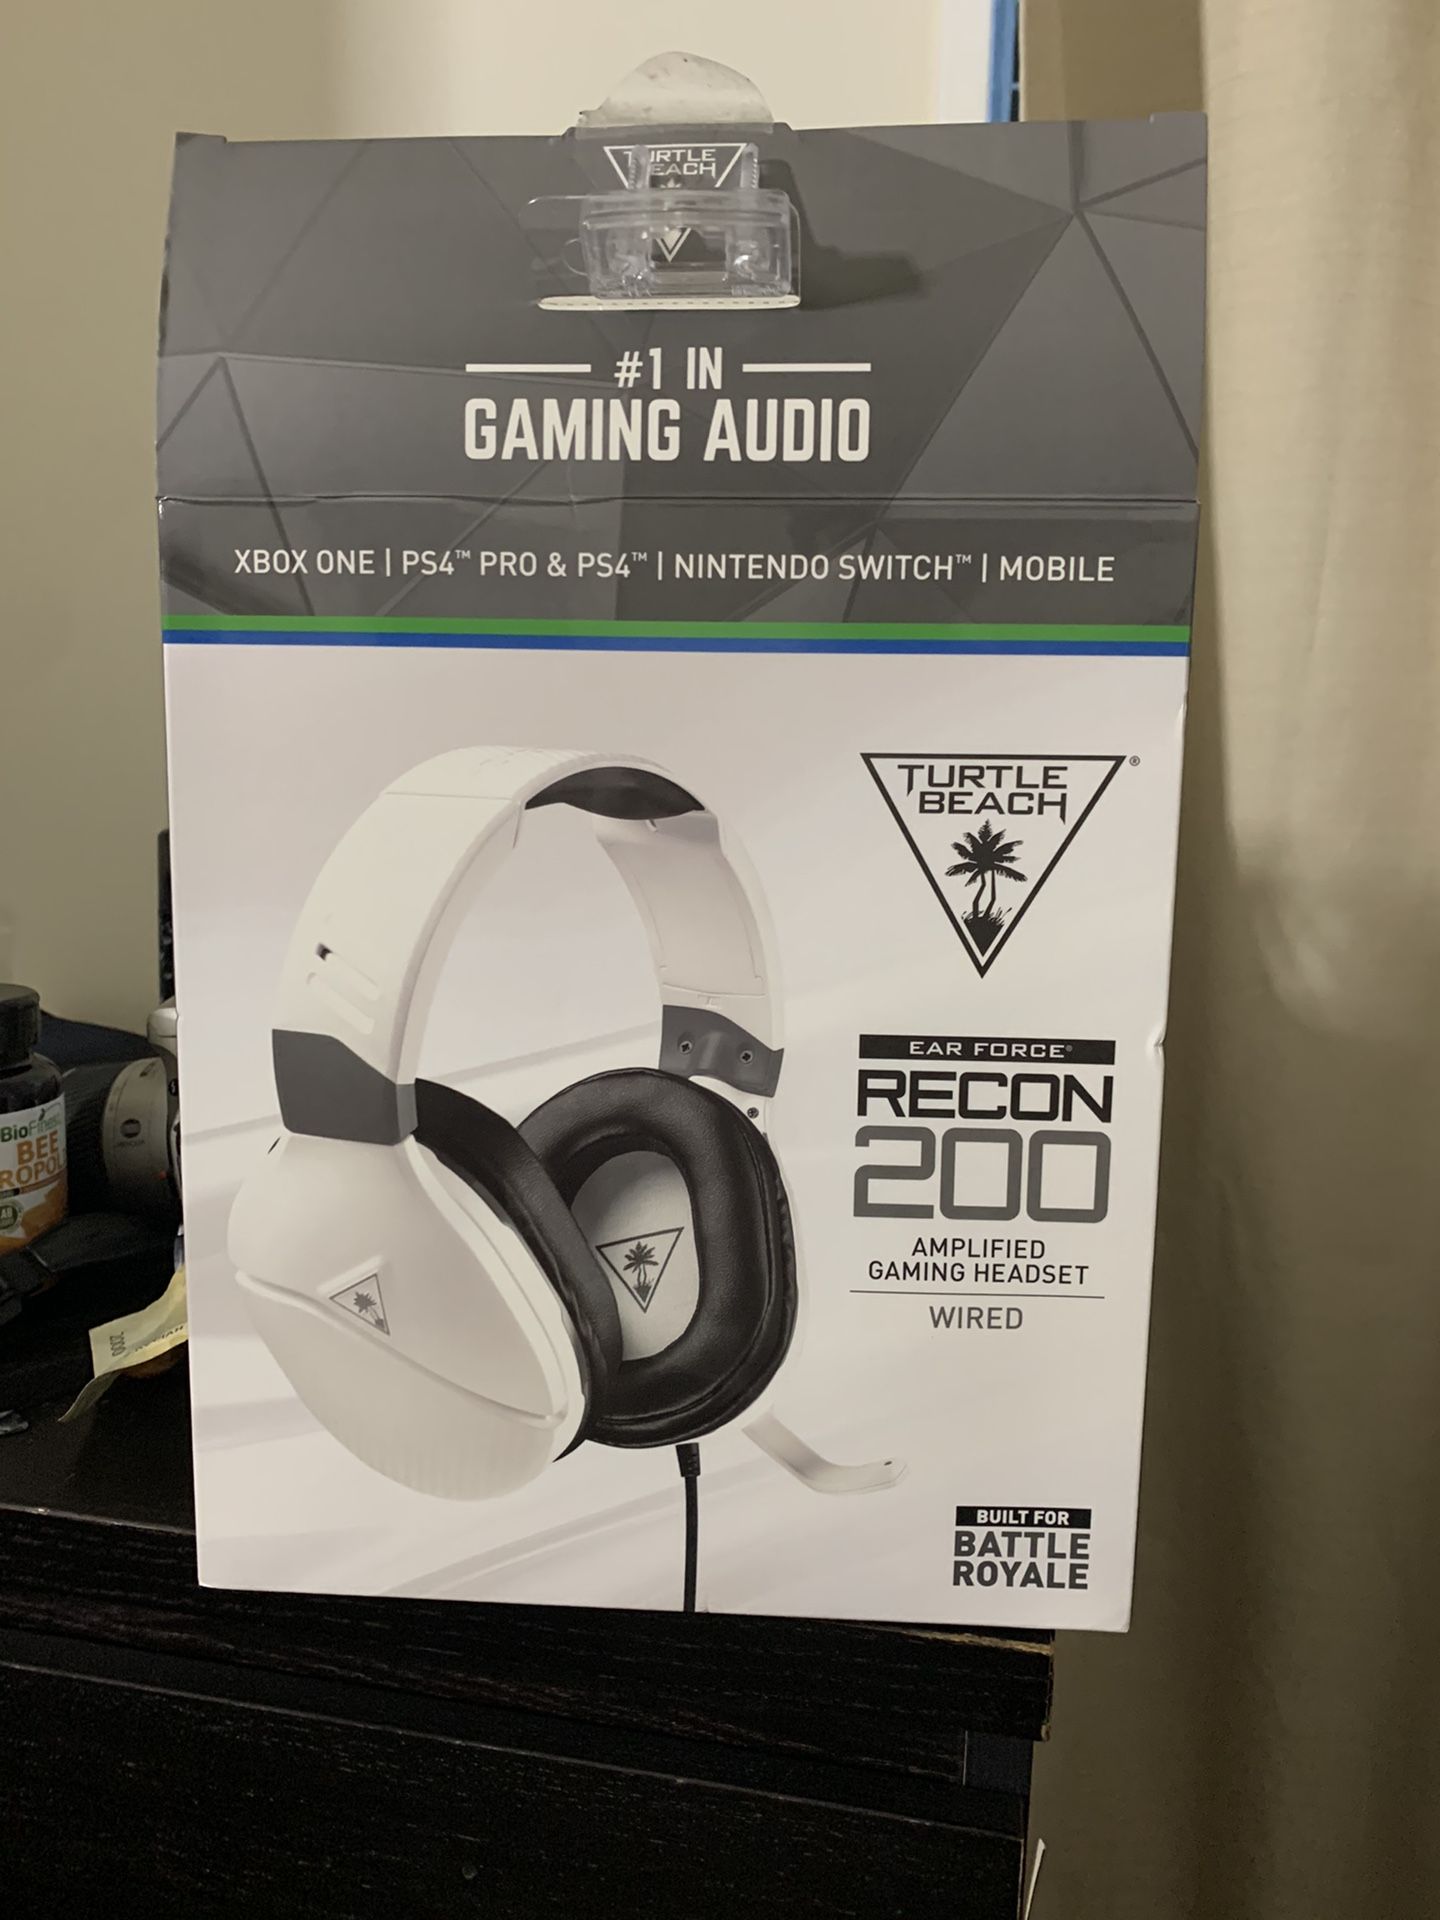 Recon 200 turtle beach headset for gaming